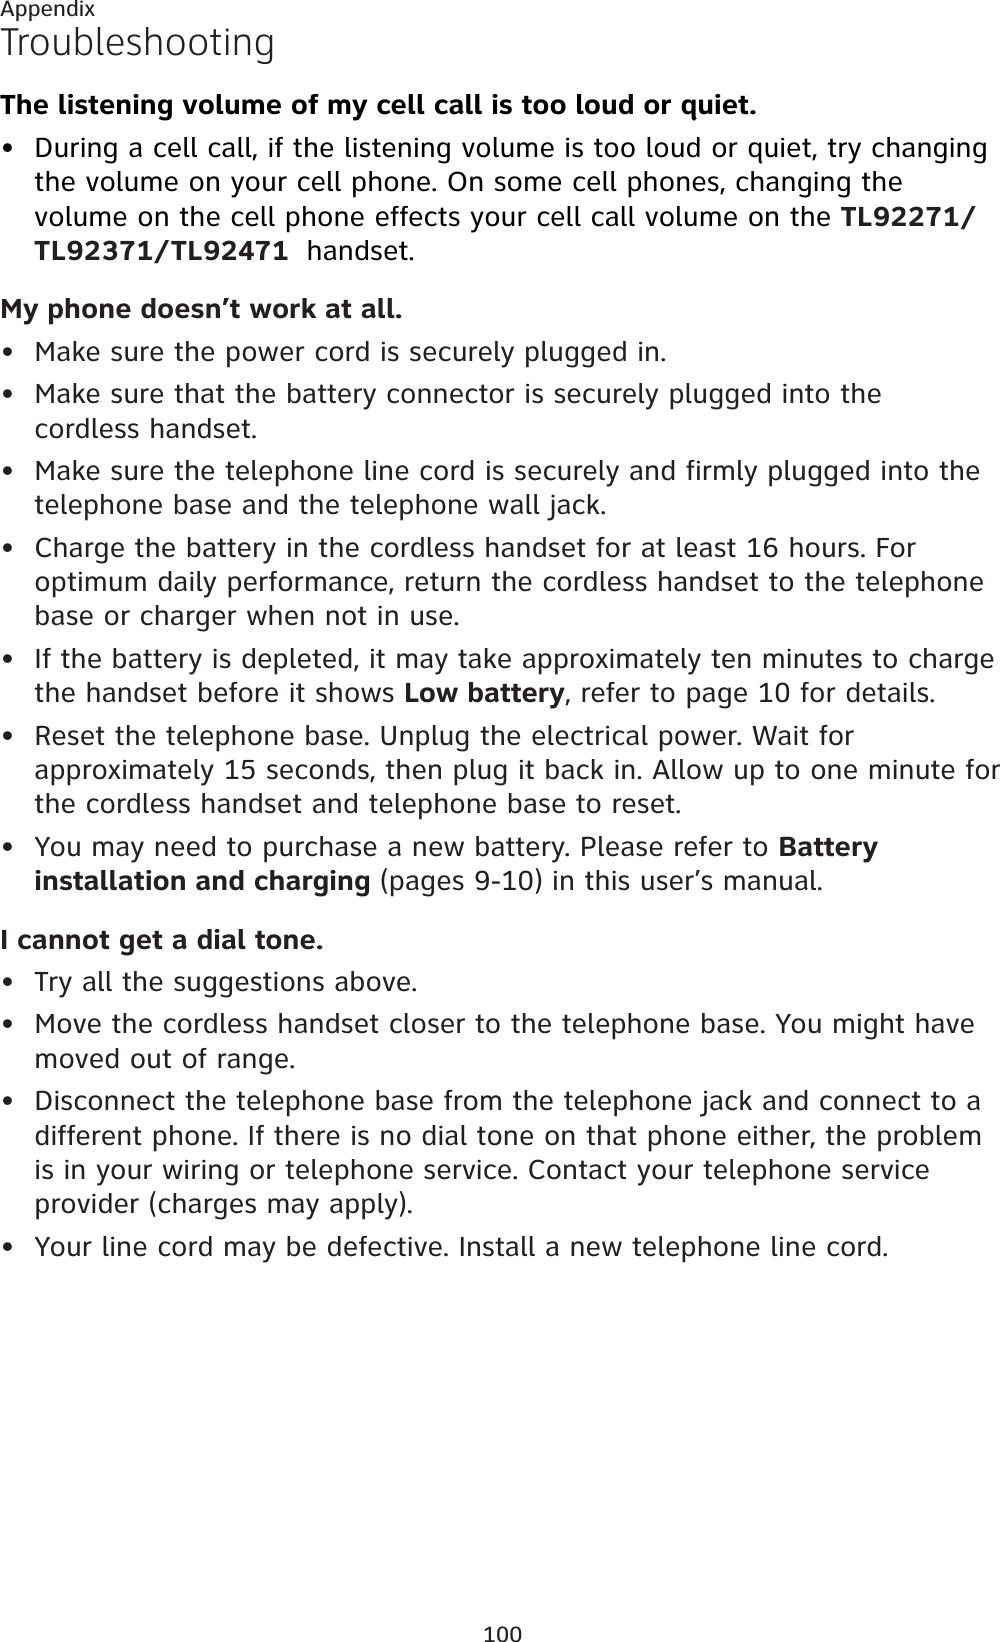 100AppendixTroubleshootingThe listening volume of my cell call is too loud or quiet.During a cell call, if the listening volume is too loud or quiet, try changing the volume on your cell phone. On some cell phones, changing the volume on the cell phone effects your cell call volume on the TL92271/TL92371/TL92471 handset.My phone doesn’t work at all.Make sure the power cord is securely plugged in.Make sure that the battery connector is securely plugged into the cordless handset.Make sure the telephone line cord is securely and firmly plugged into the telephone base and the telephone wall jack.Charge the battery in the cordless handset for at least 16 hours. For optimum daily performance, return the cordless handset to the telephone base or charger when not in use.If the battery is depleted, it may take approximately ten minutes to charge the handset before it shows Low battery, refer to page 10 for details.Reset the telephone base. Unplug the electrical power. Wait for approximately 15 seconds, then plug it back in. Allow up to one minute for the cordless handset and telephone base to reset.You may need to purchase a new battery. Please refer to Battery installation and charging (pages 9-10) in this user’s manual.I cannot get a dial tone.Try all the suggestions above.Move the cordless handset closer to the telephone base. You might have moved out of range.Disconnect the telephone base from the telephone jack and connect to a different phone. If there is no dial tone on that phone either, the problem is in your wiring or telephone service. Contact your telephone service provider (charges may apply).Your line cord may be defective. Install a new telephone line cord.••••••••••••